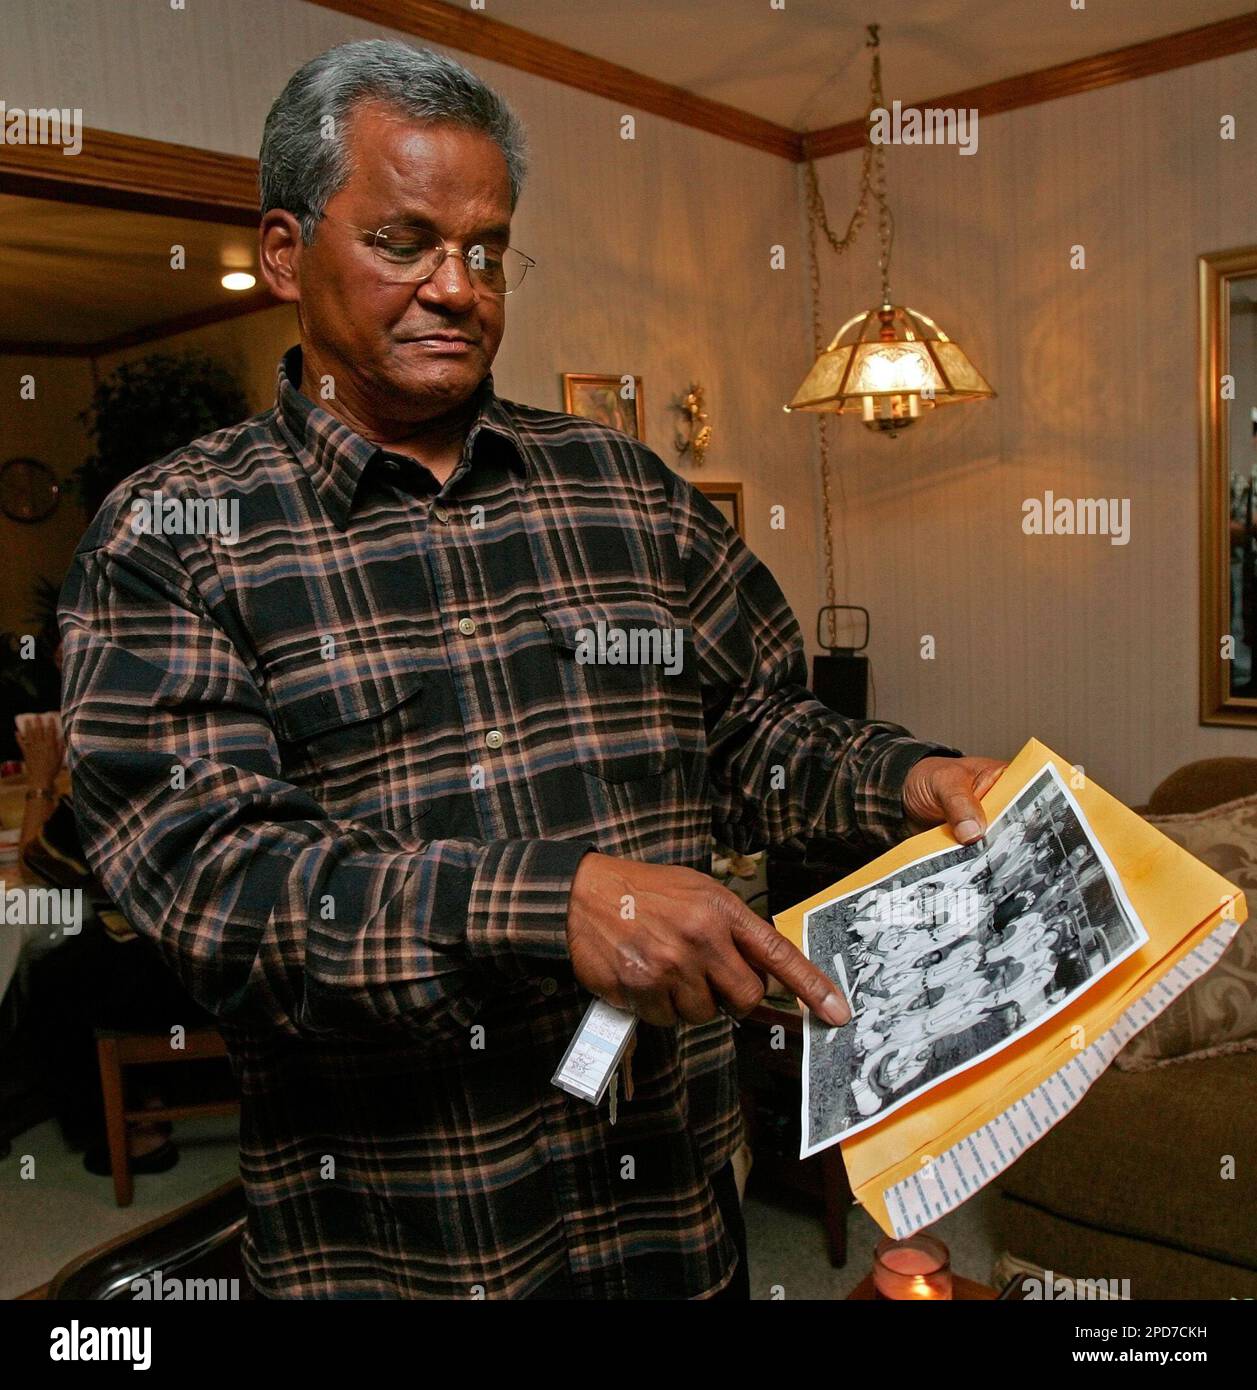 Frank Garnett points to a photograph of his youth baseball team during a  party with friends in Edgard, La., March 16, 2006. Garnett, know to his  buddies as "California Frankie," had grown